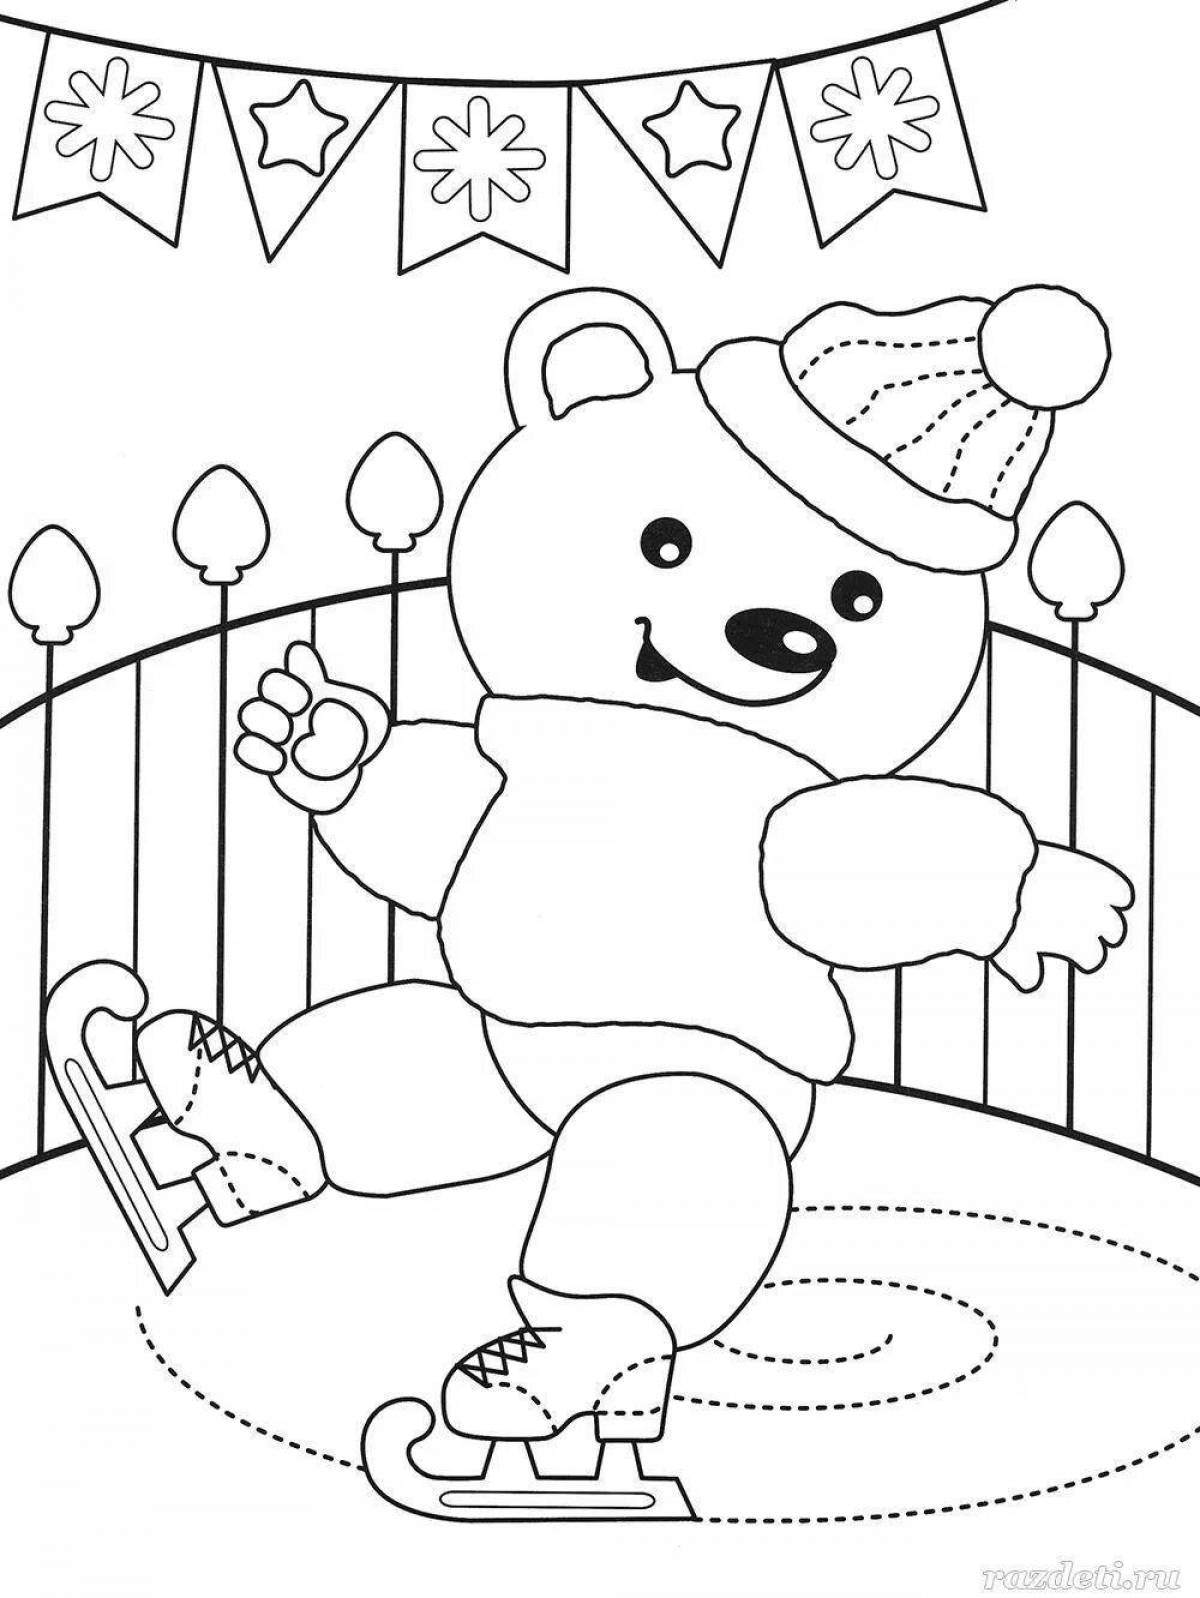 A fascinating coloring book for children 6 years old winter